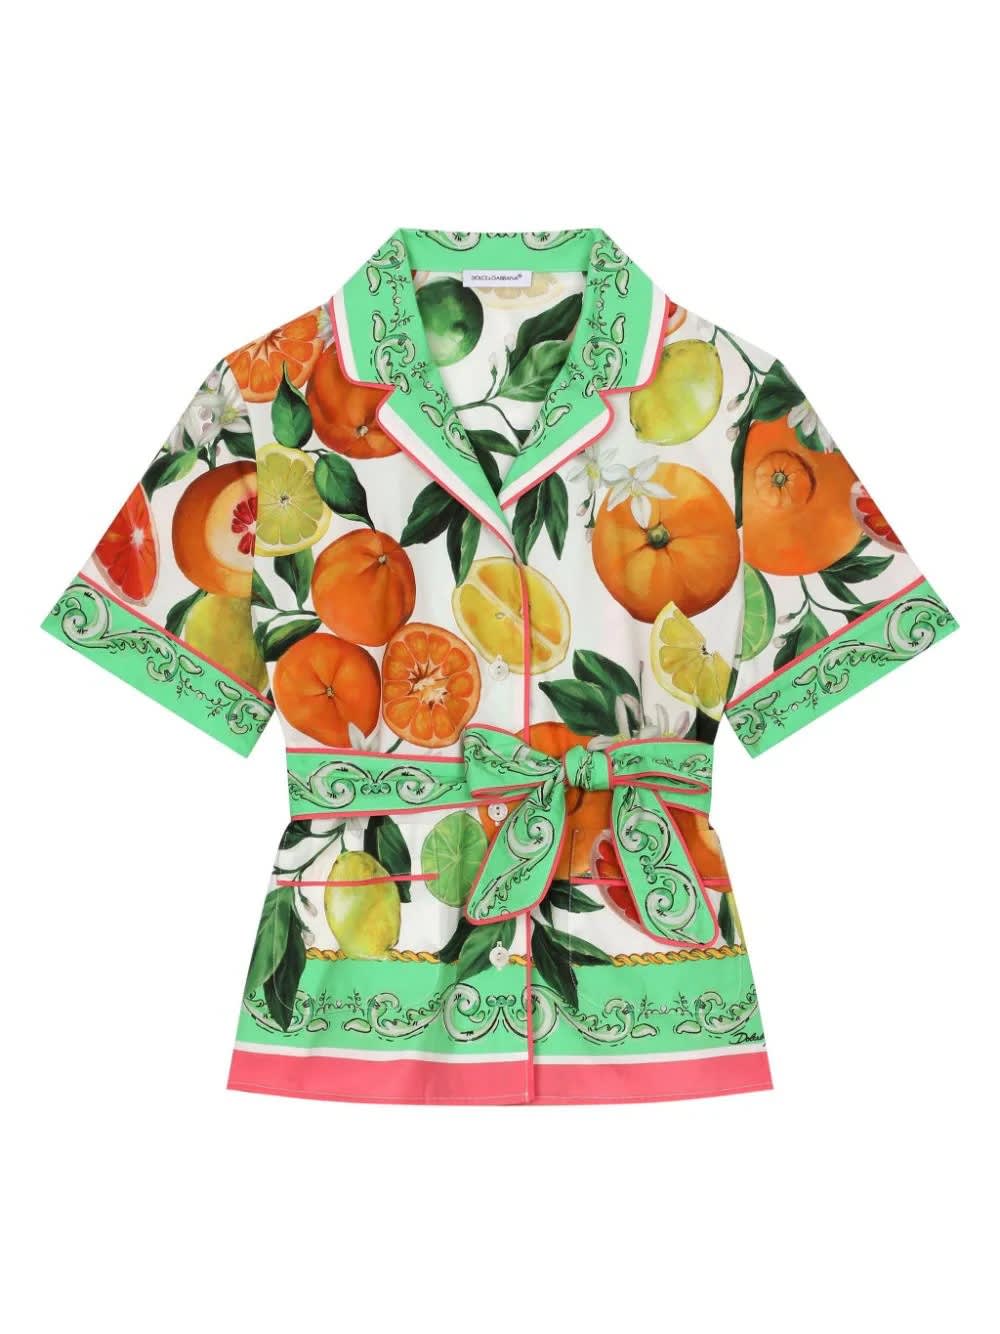 Dolce & Gabbana Kids' Shirt With Belt And Orange And Lemon Print In Multicolour